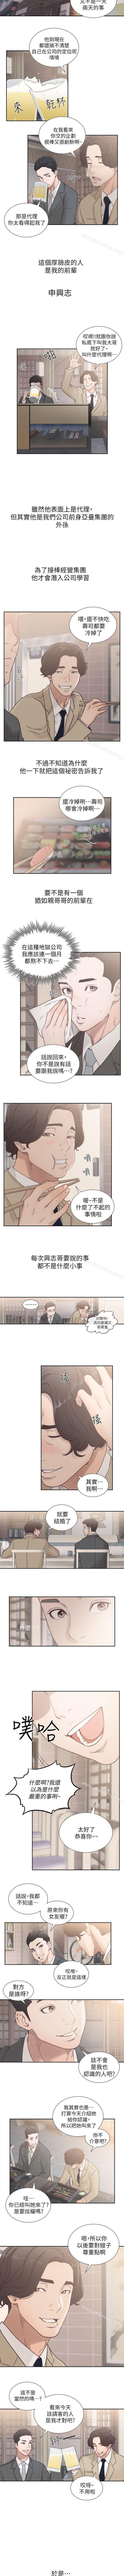 With 前女友 1-51 Cdmx - Page 6